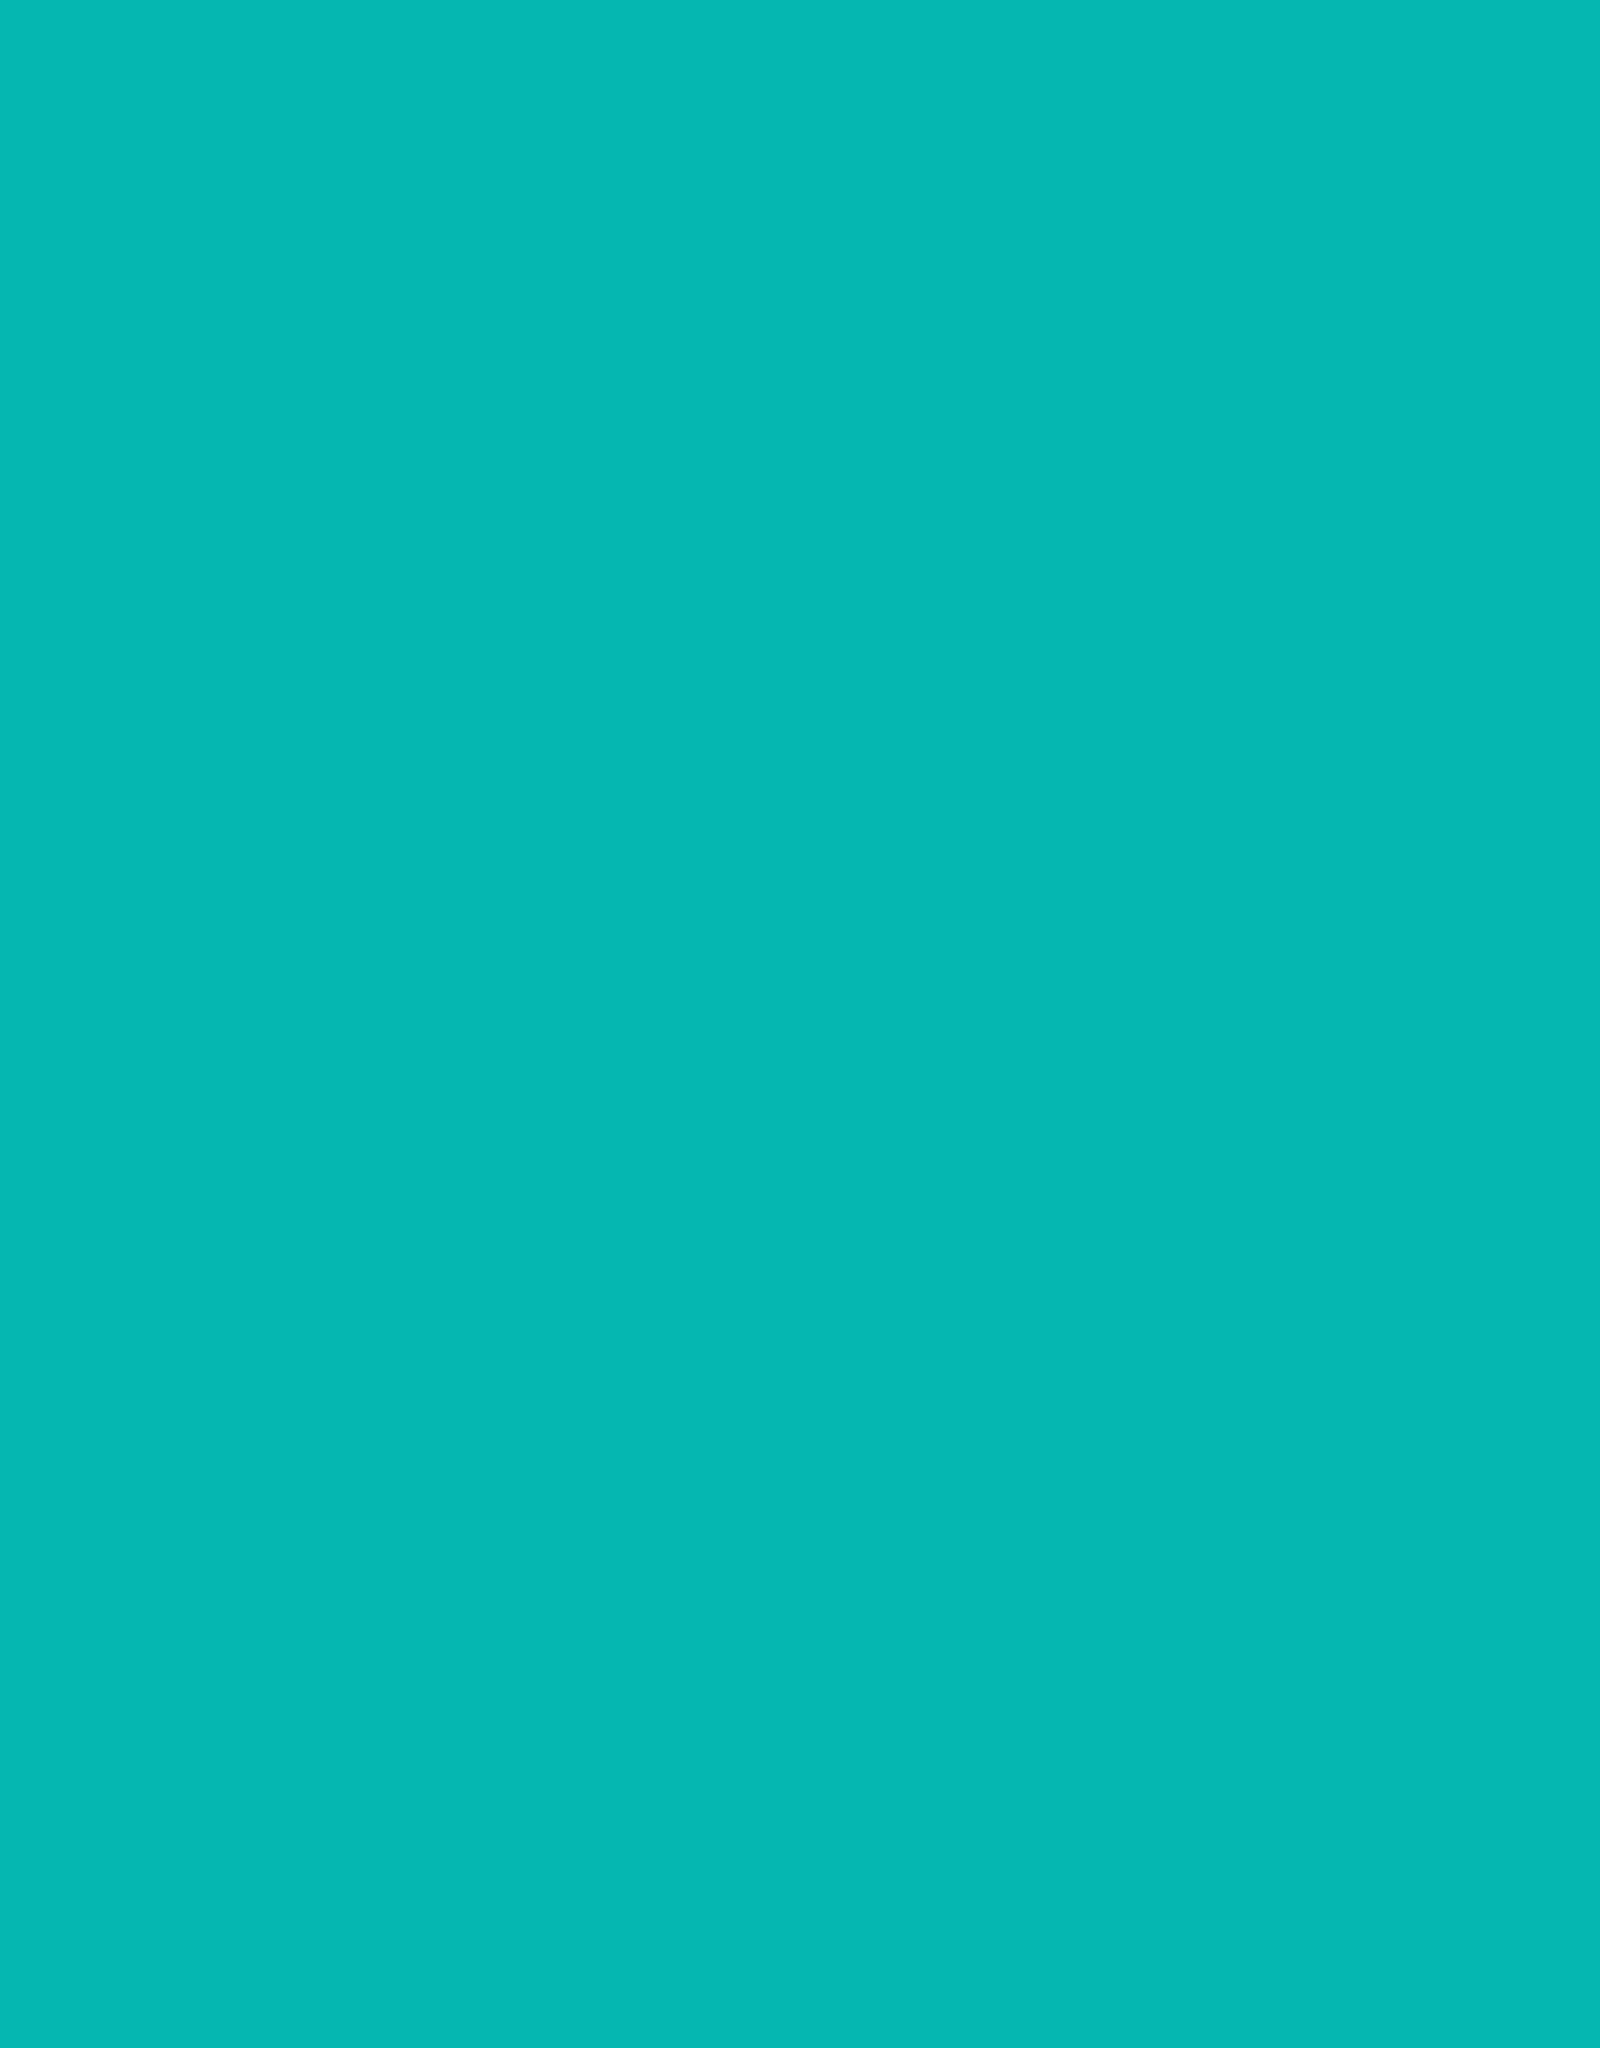 Golden Acrylic Paint HB Series 3 Teal